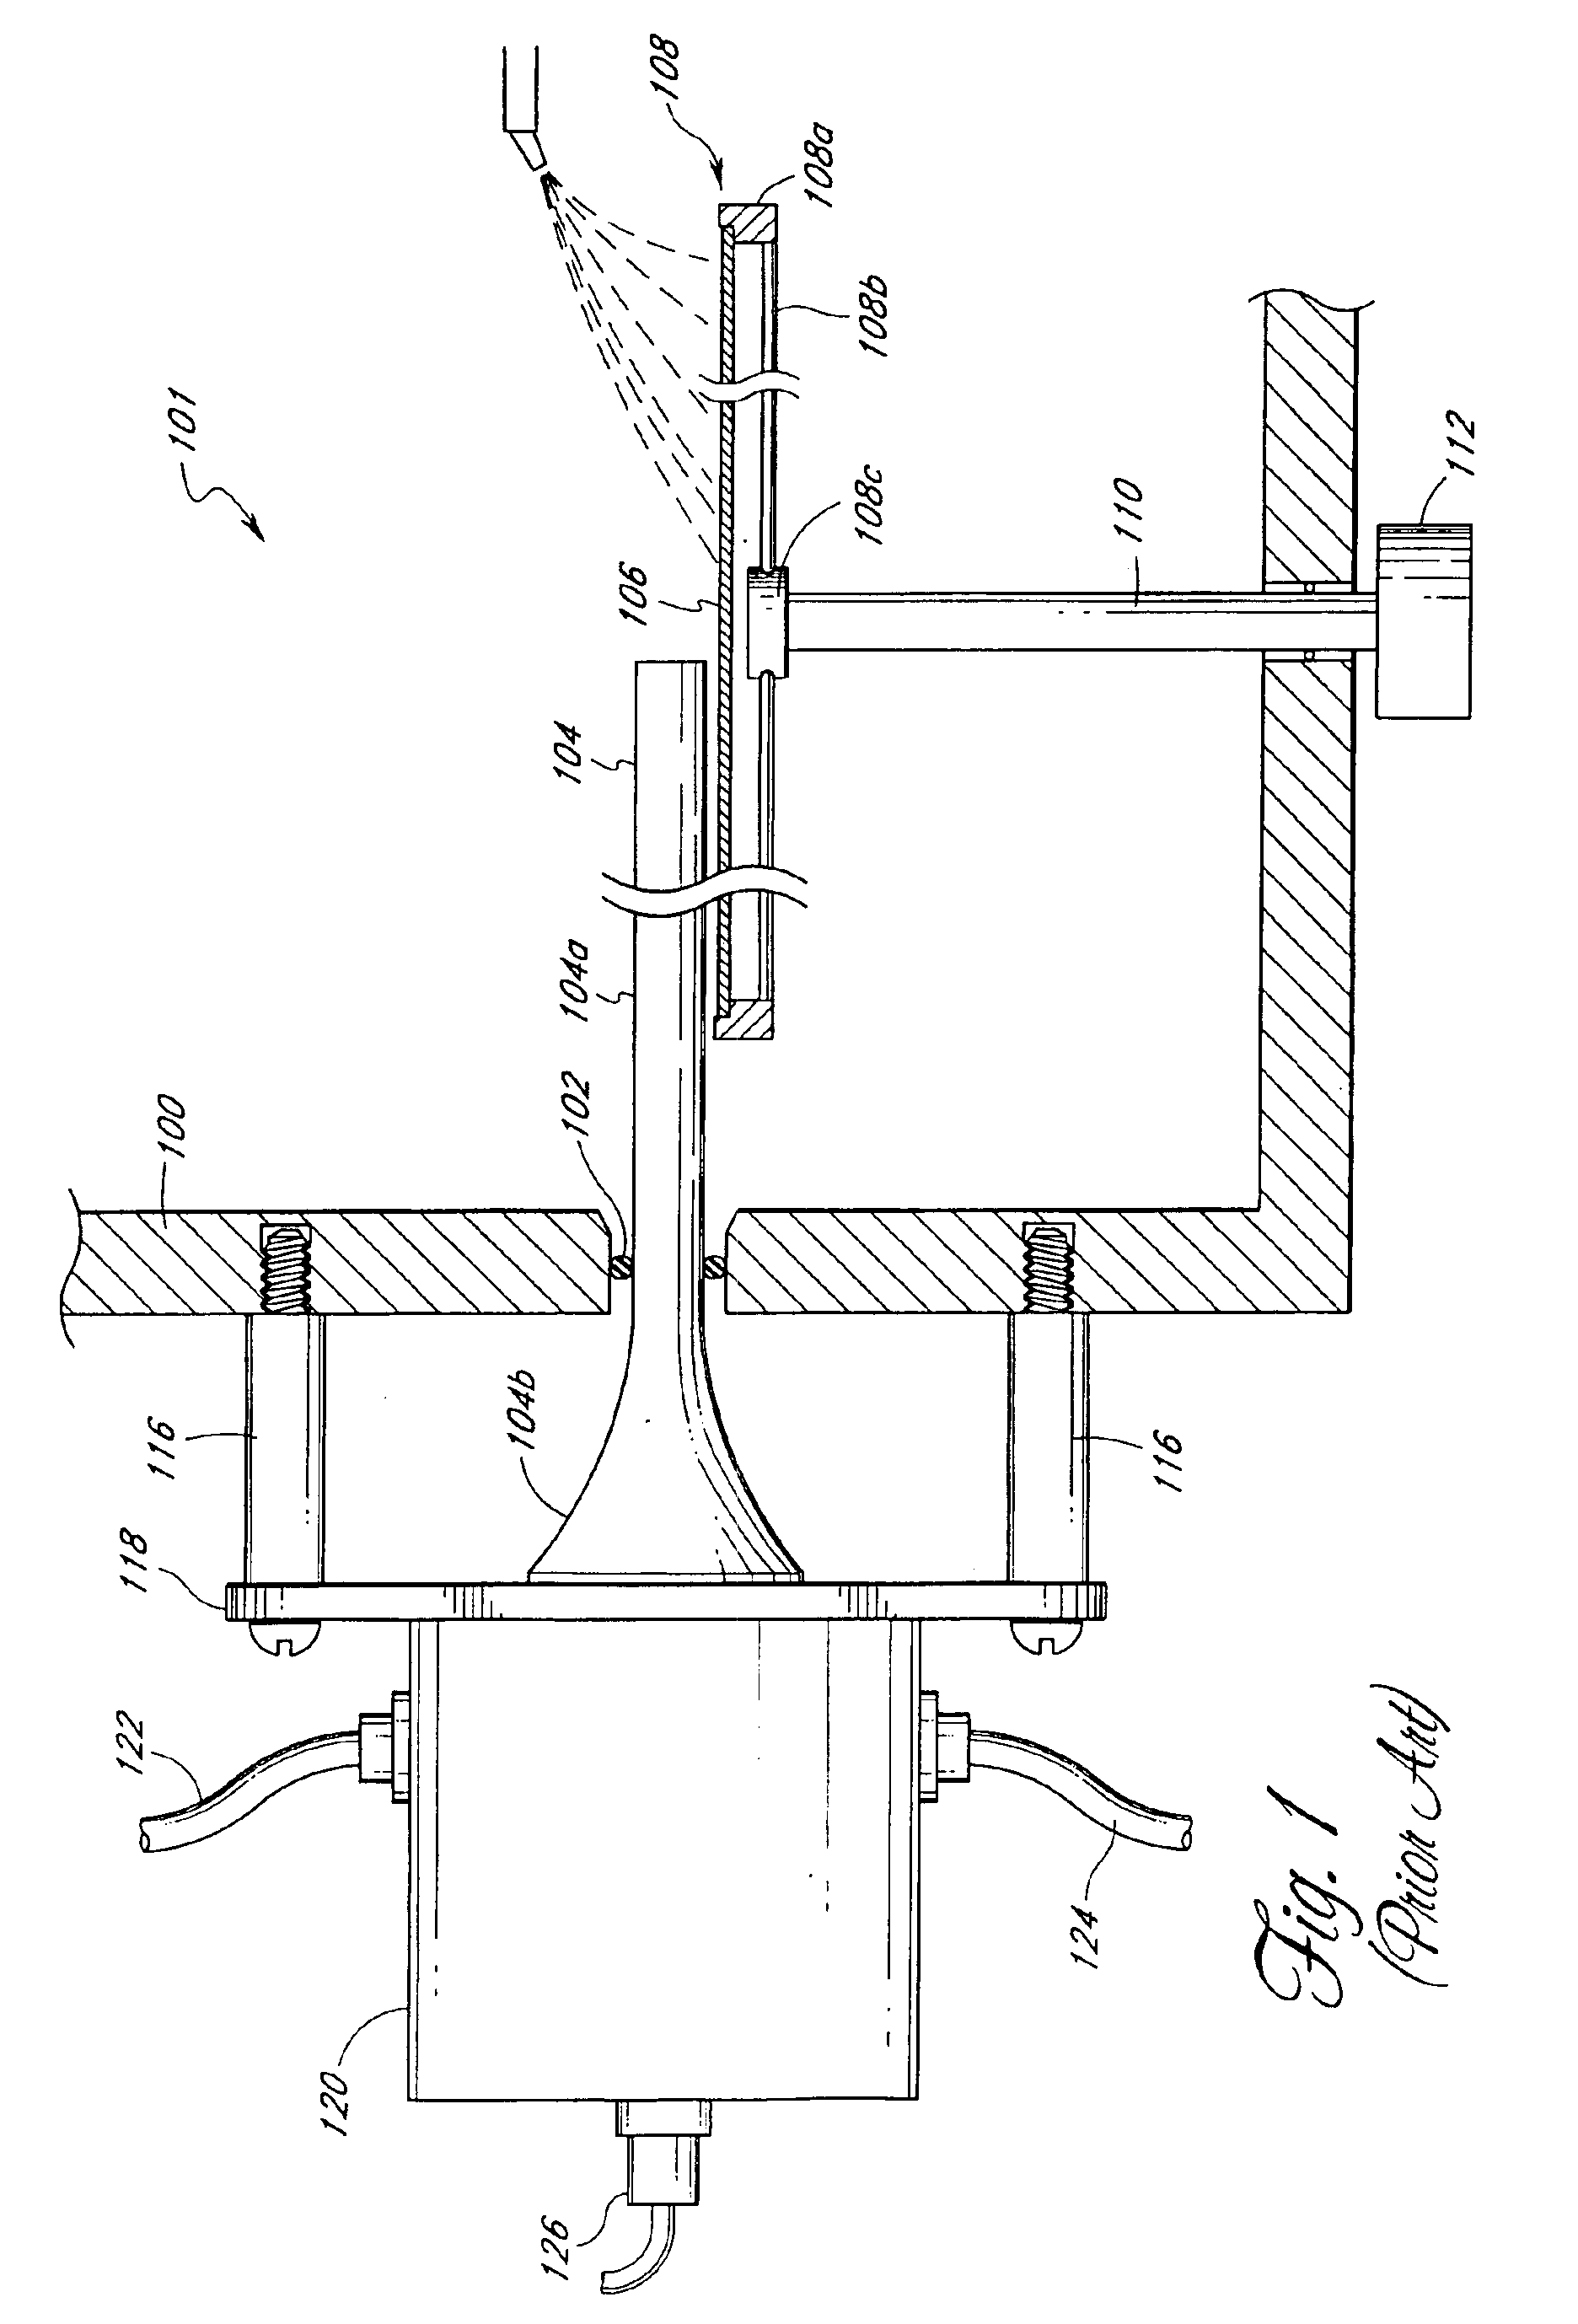 Apparatus and methods for reducing damage to substrates during megasonic cleaning processes